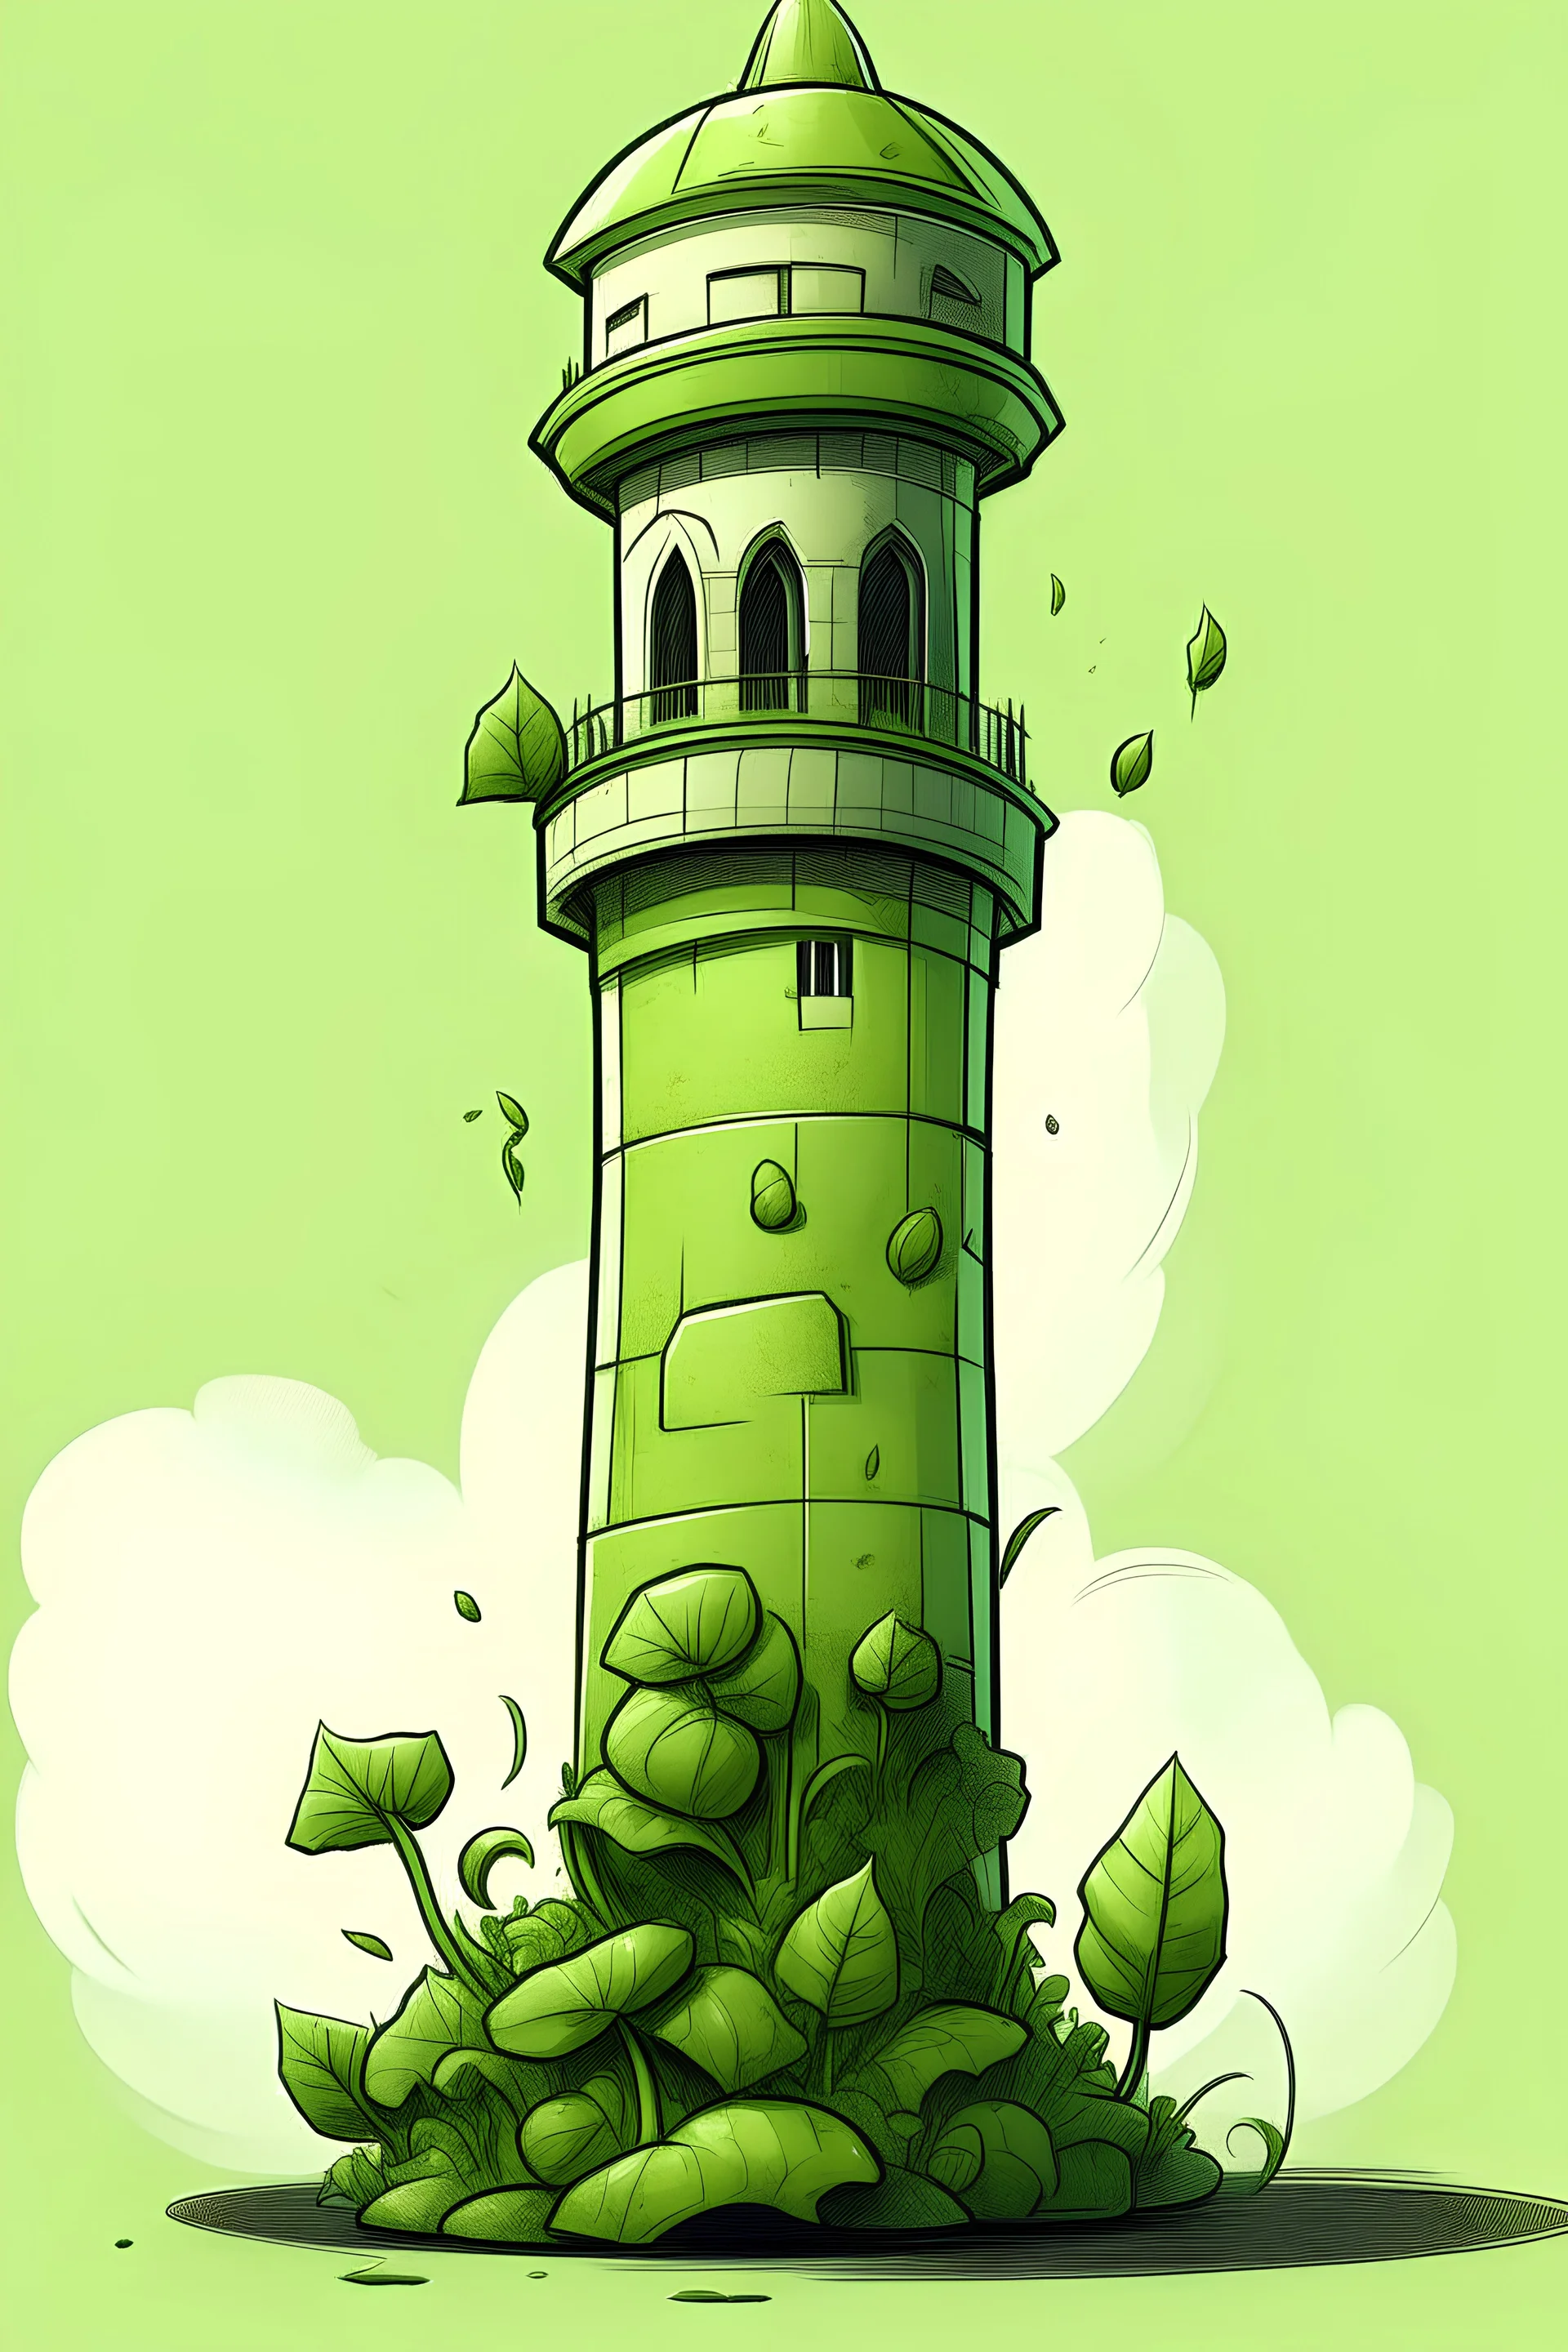 A tall tower with a mouth eating green lettuce